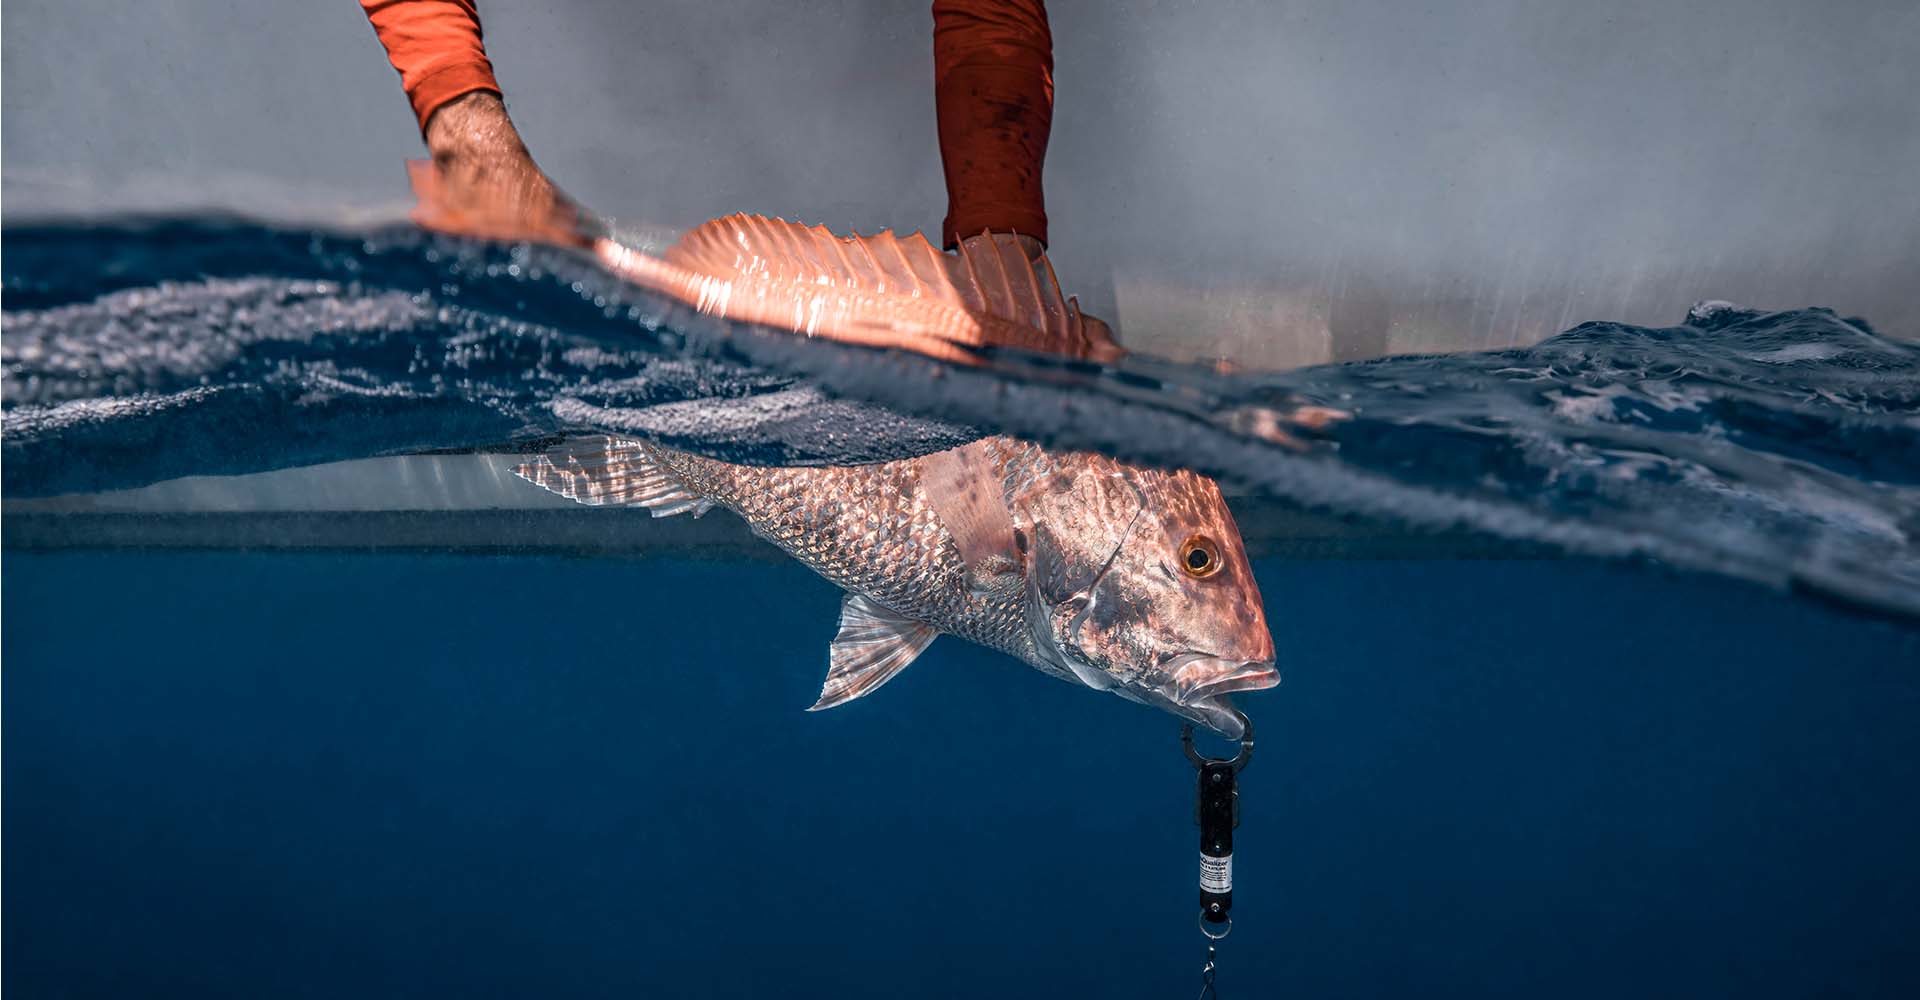 Photo of a person holding a red snapper at the water's surface that's being lowered by a descending device